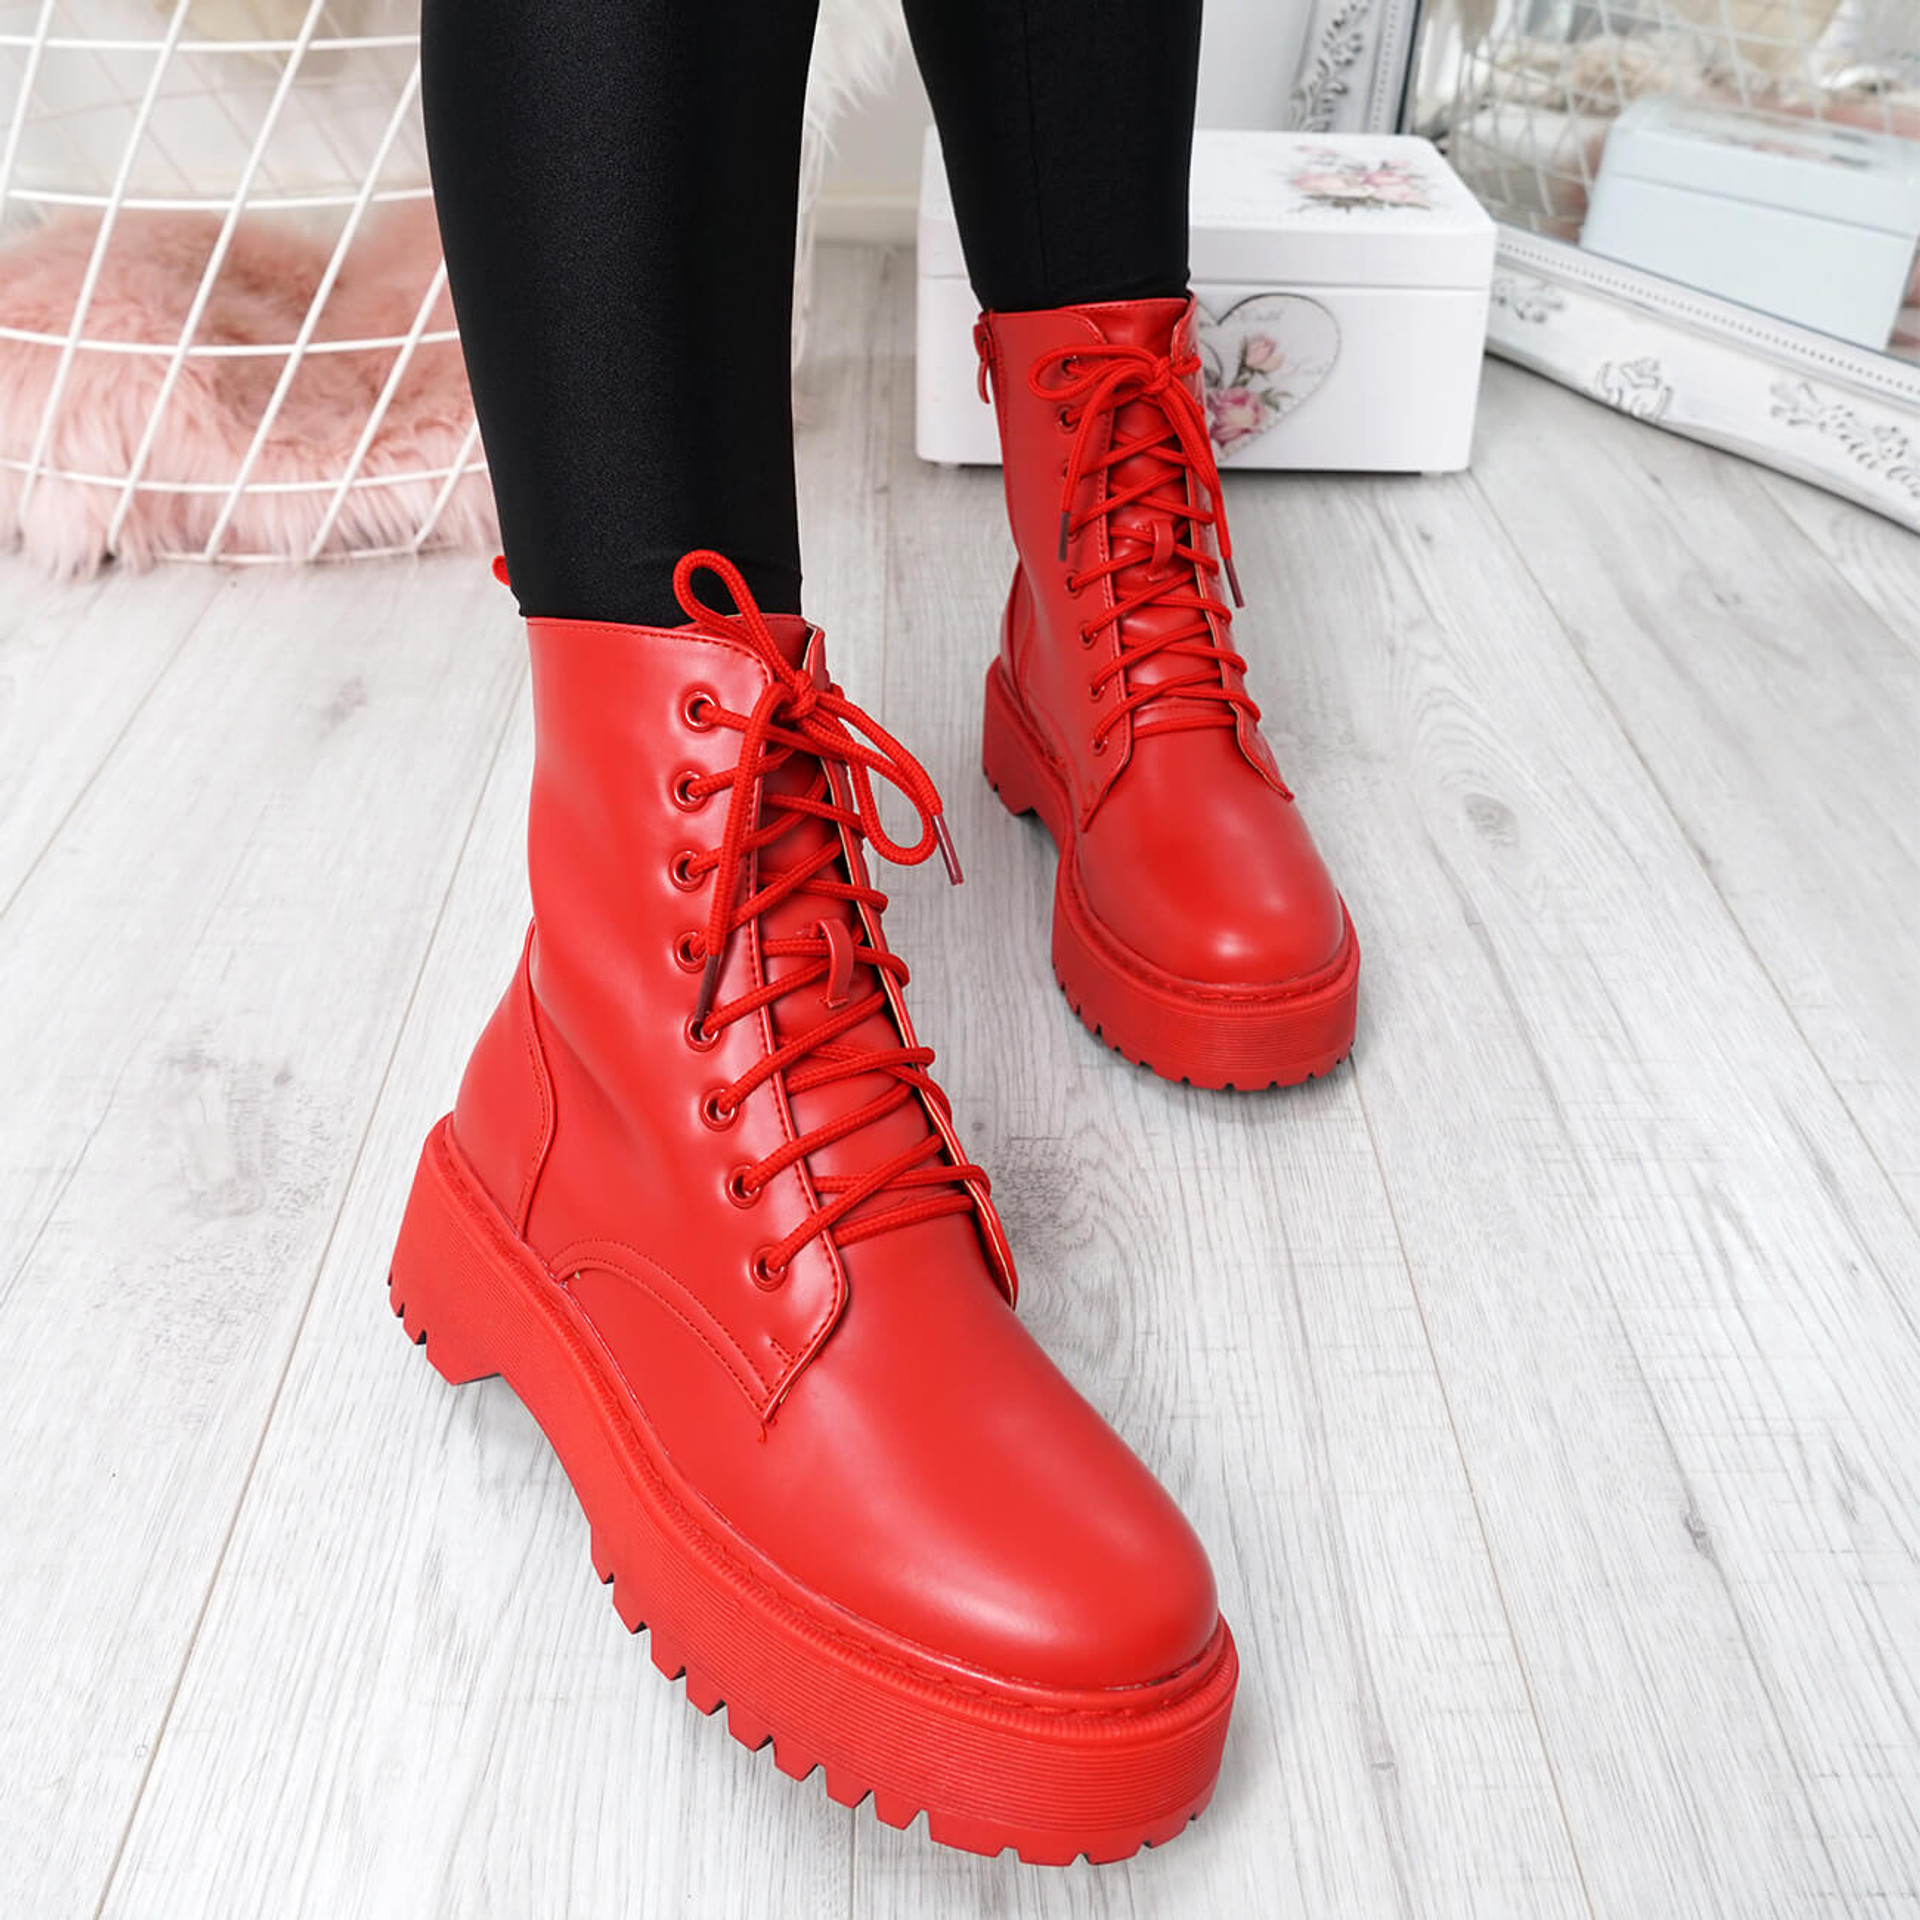 Tergy Red Lace Up Biker Boots